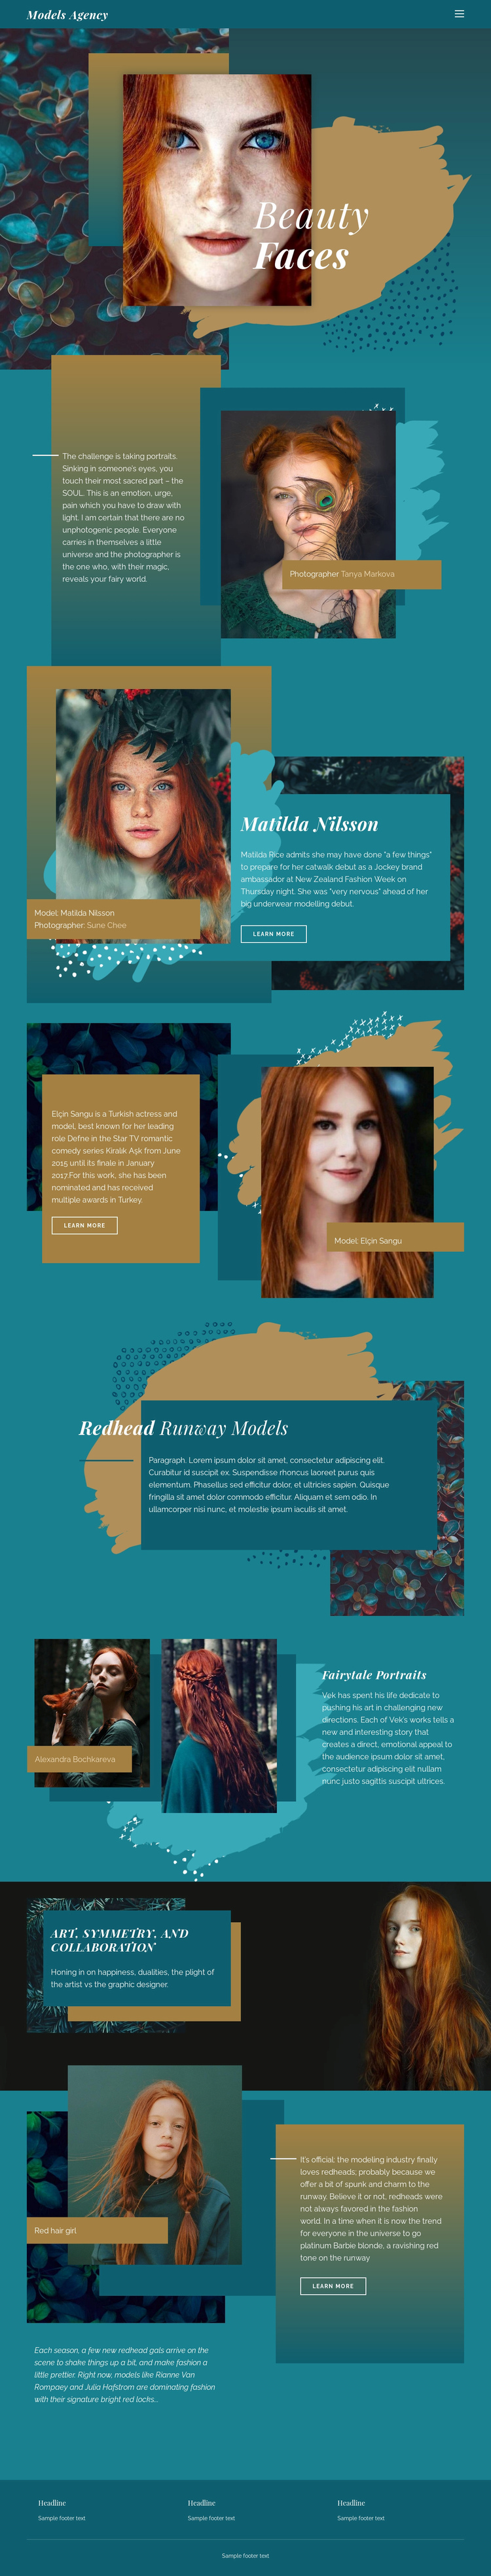 Faces of modern fashion Squarespace Template Alternative